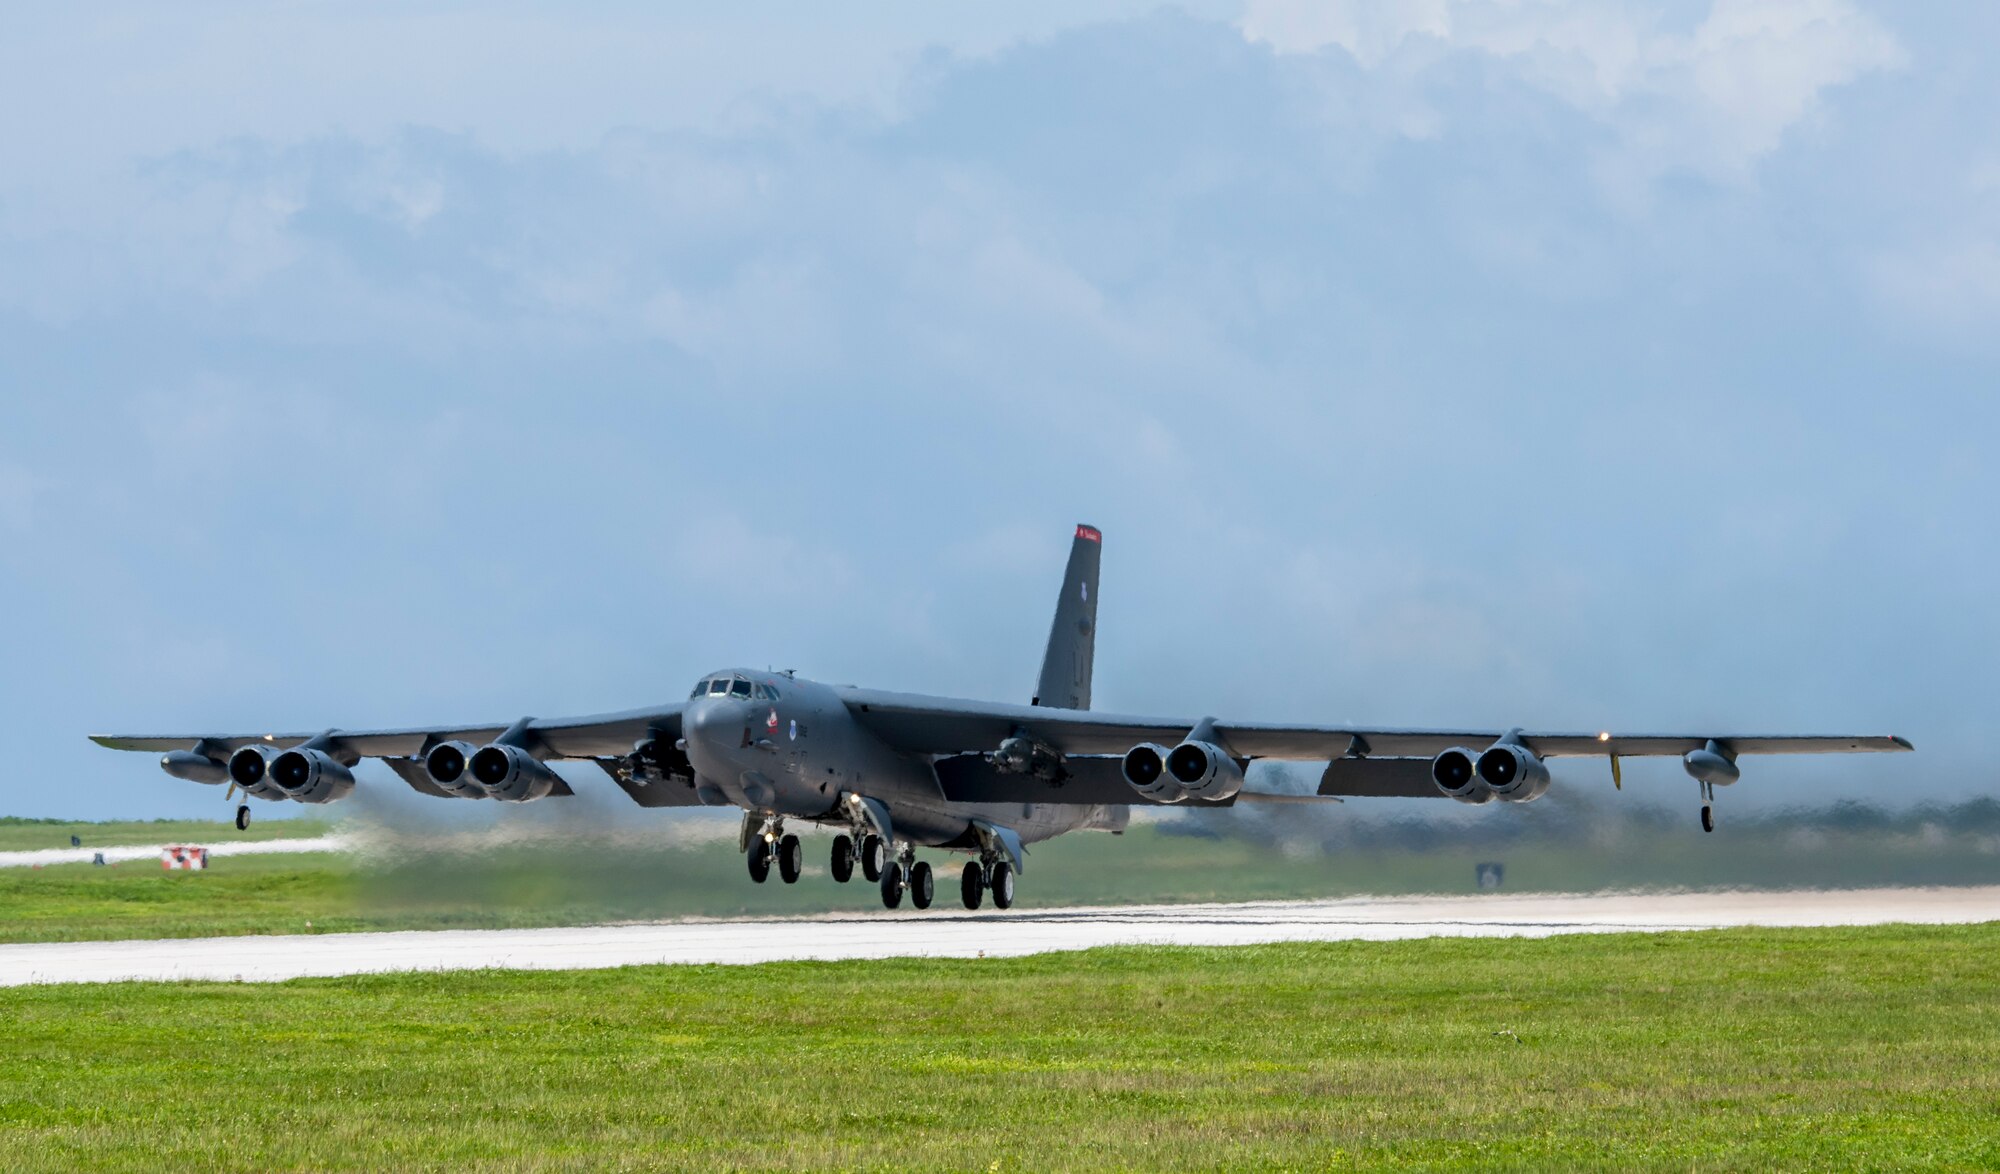 A U.S. Air Force B-52H Stratofortress bomber takes off from Andersen Air Force Base, Guam, on a higher headquarters-directed Continuous Bomber Presence mission in support of exercise Pitch Black 18 in Australia's Northern Territory Aug. 6, 2018 (HST). Bilateral training between the United States and allies like Australia increases interoperability and strengthens our long-standing military-to-military partnerships. (U.S. Air Force photo by Airman 1st Class Christopher Quail)